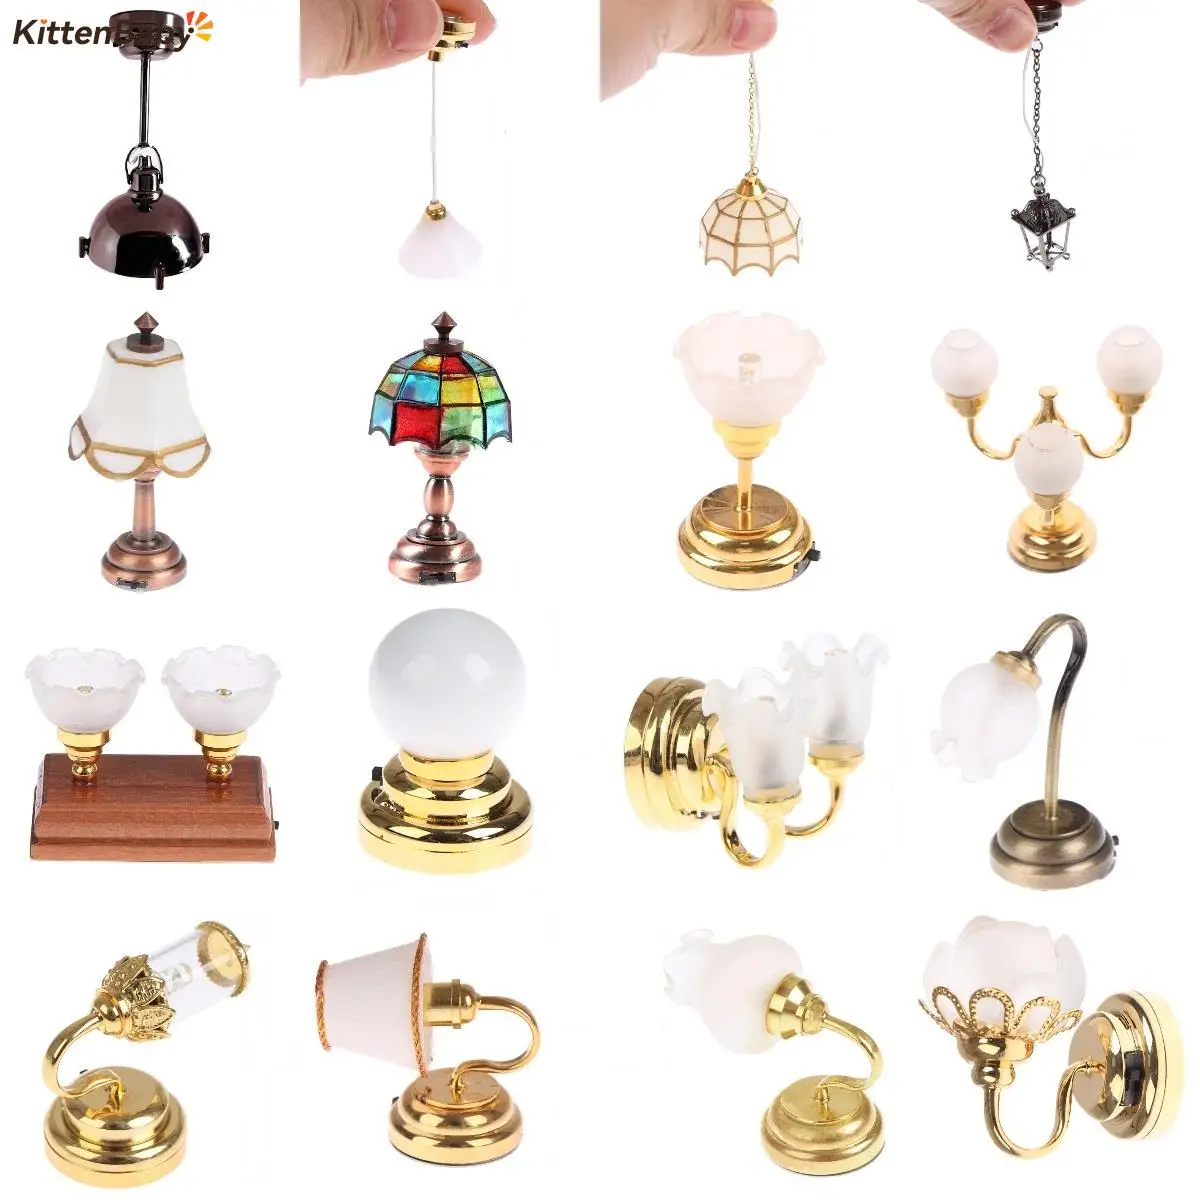 1/12 Miniature Dollhouse Ceiling Lamp Wall Light Desk Lamp Mini LED Lighting Home Decoration Doll Furniture Toy Can Be Bright